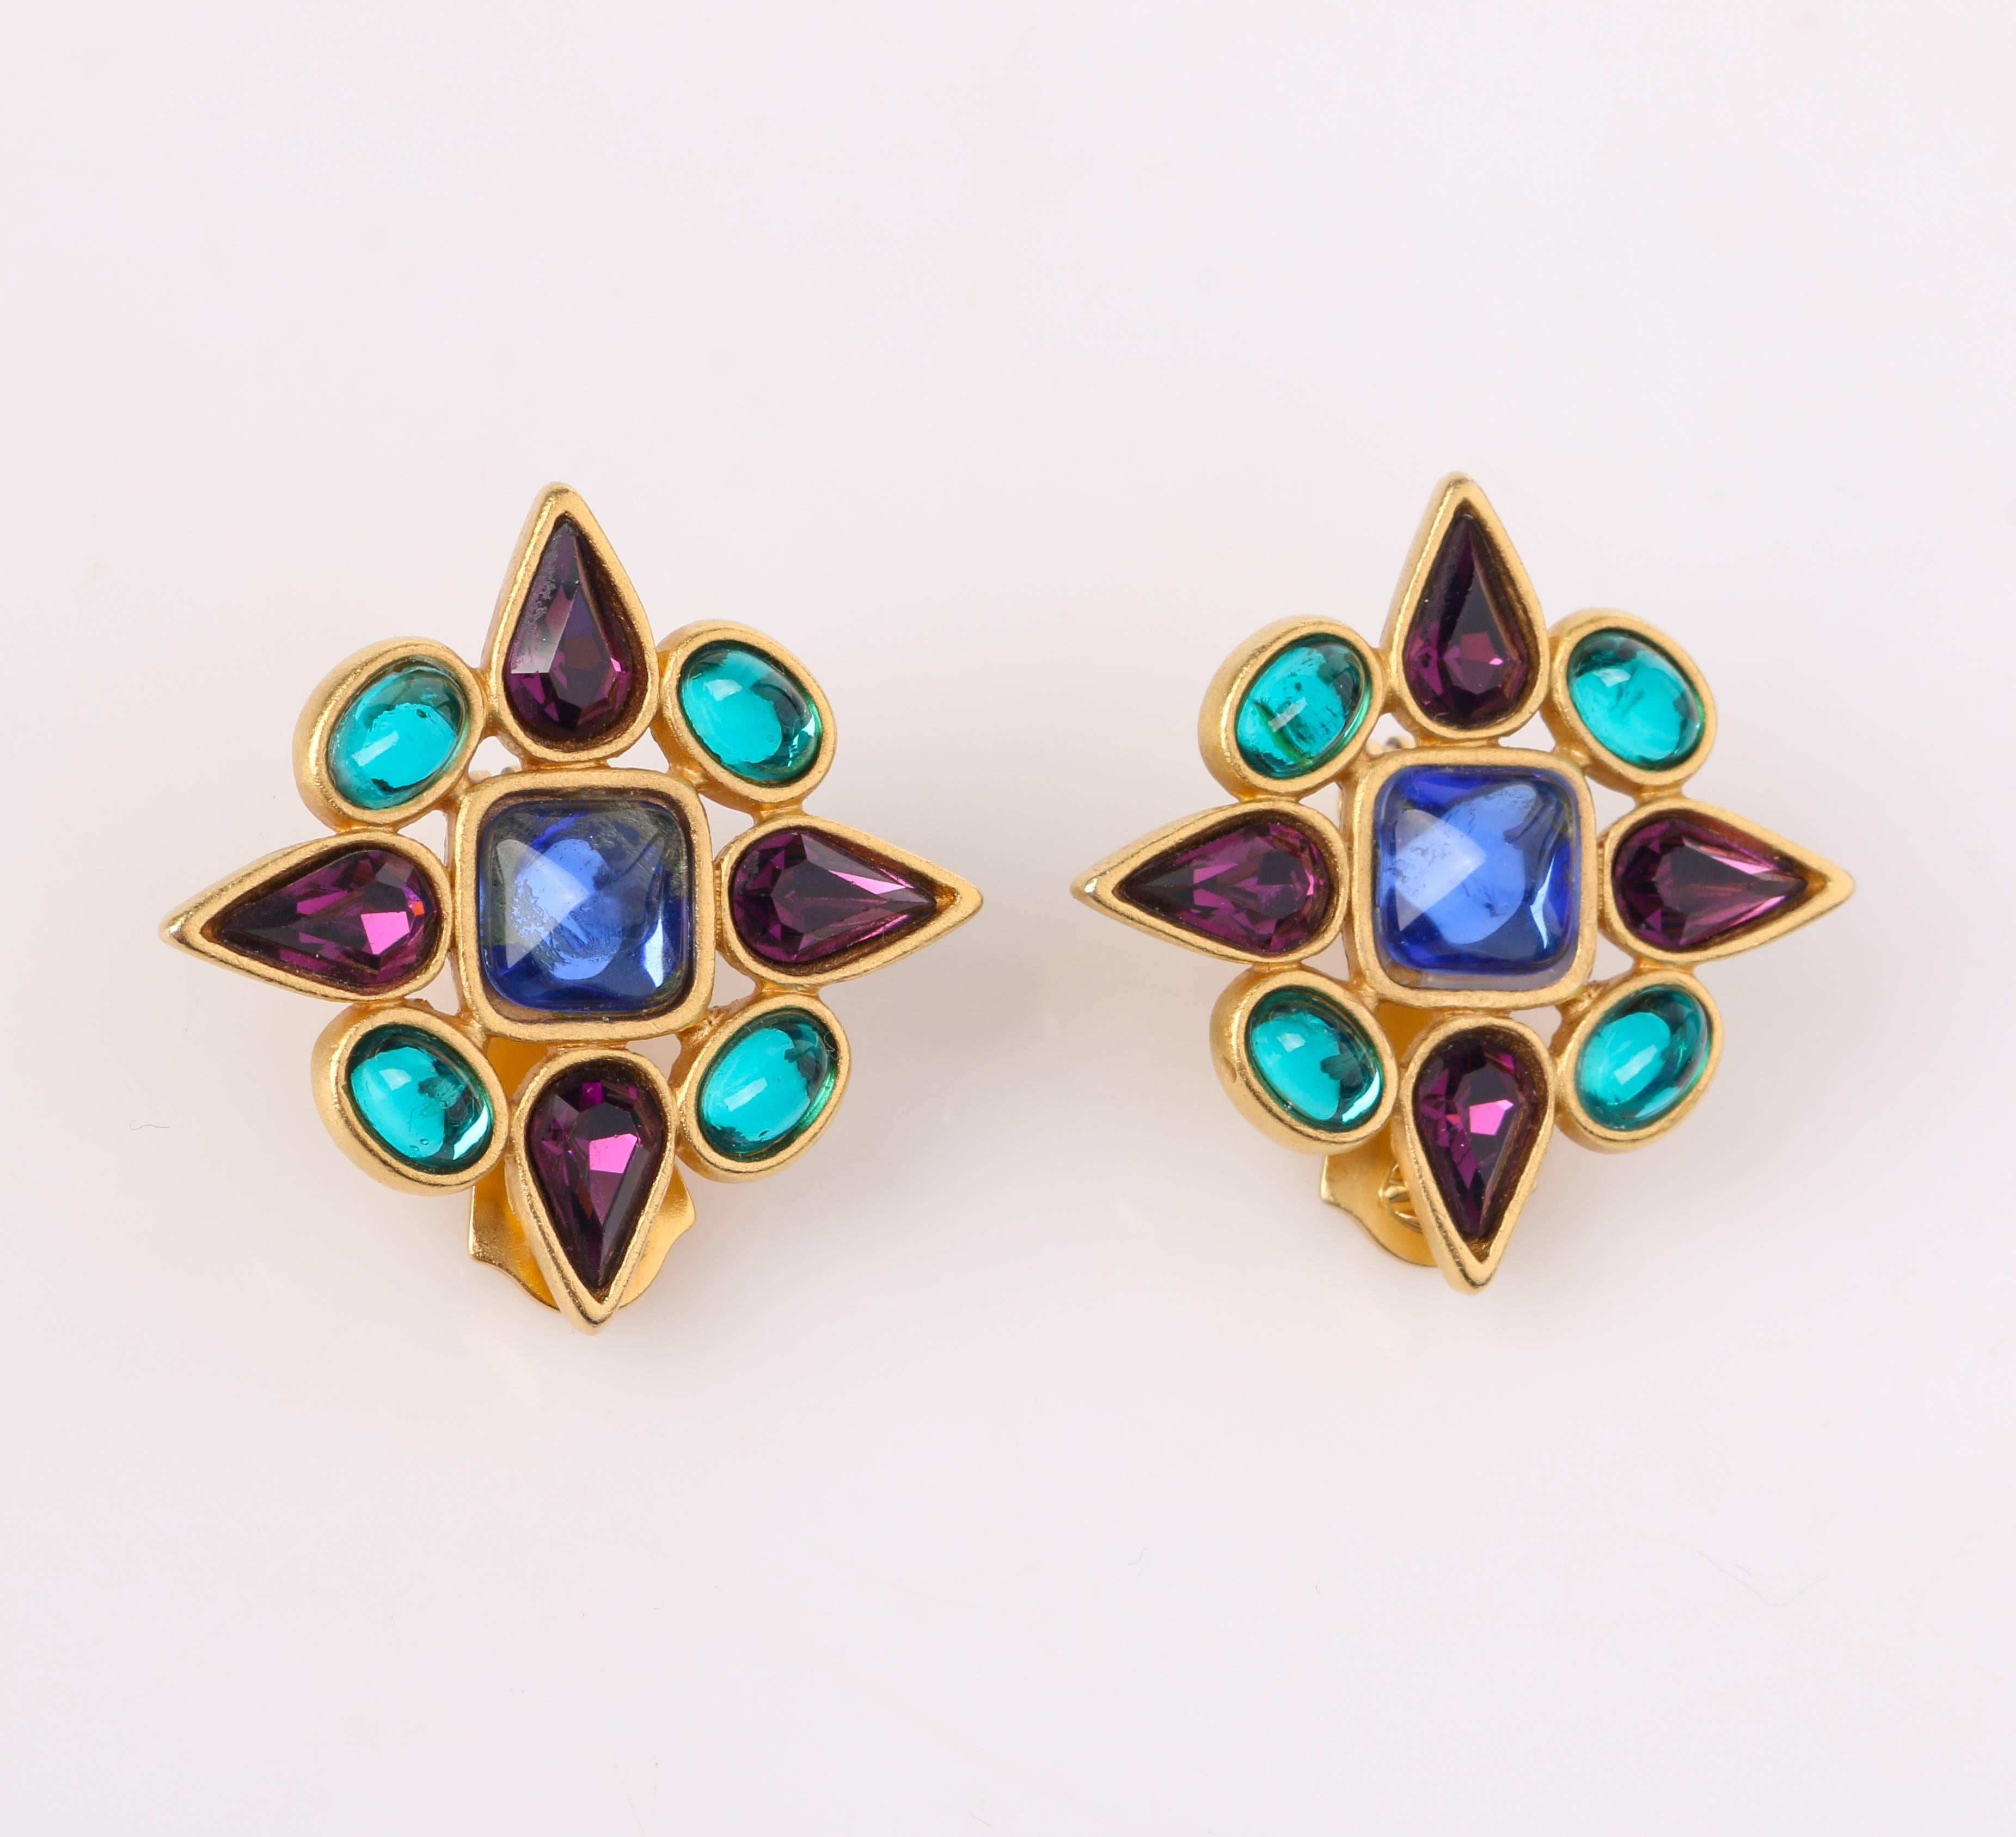 Vintage Yves Saint Laurent c.1980's gold-toned metal and multi-color gripoix (poured glass) clip on earrings. Brushed gold-toned metal setting. Center blue square glass cabochon (7.5mm). Four oval teal glass cabochons (5mm) and four amethyst purple